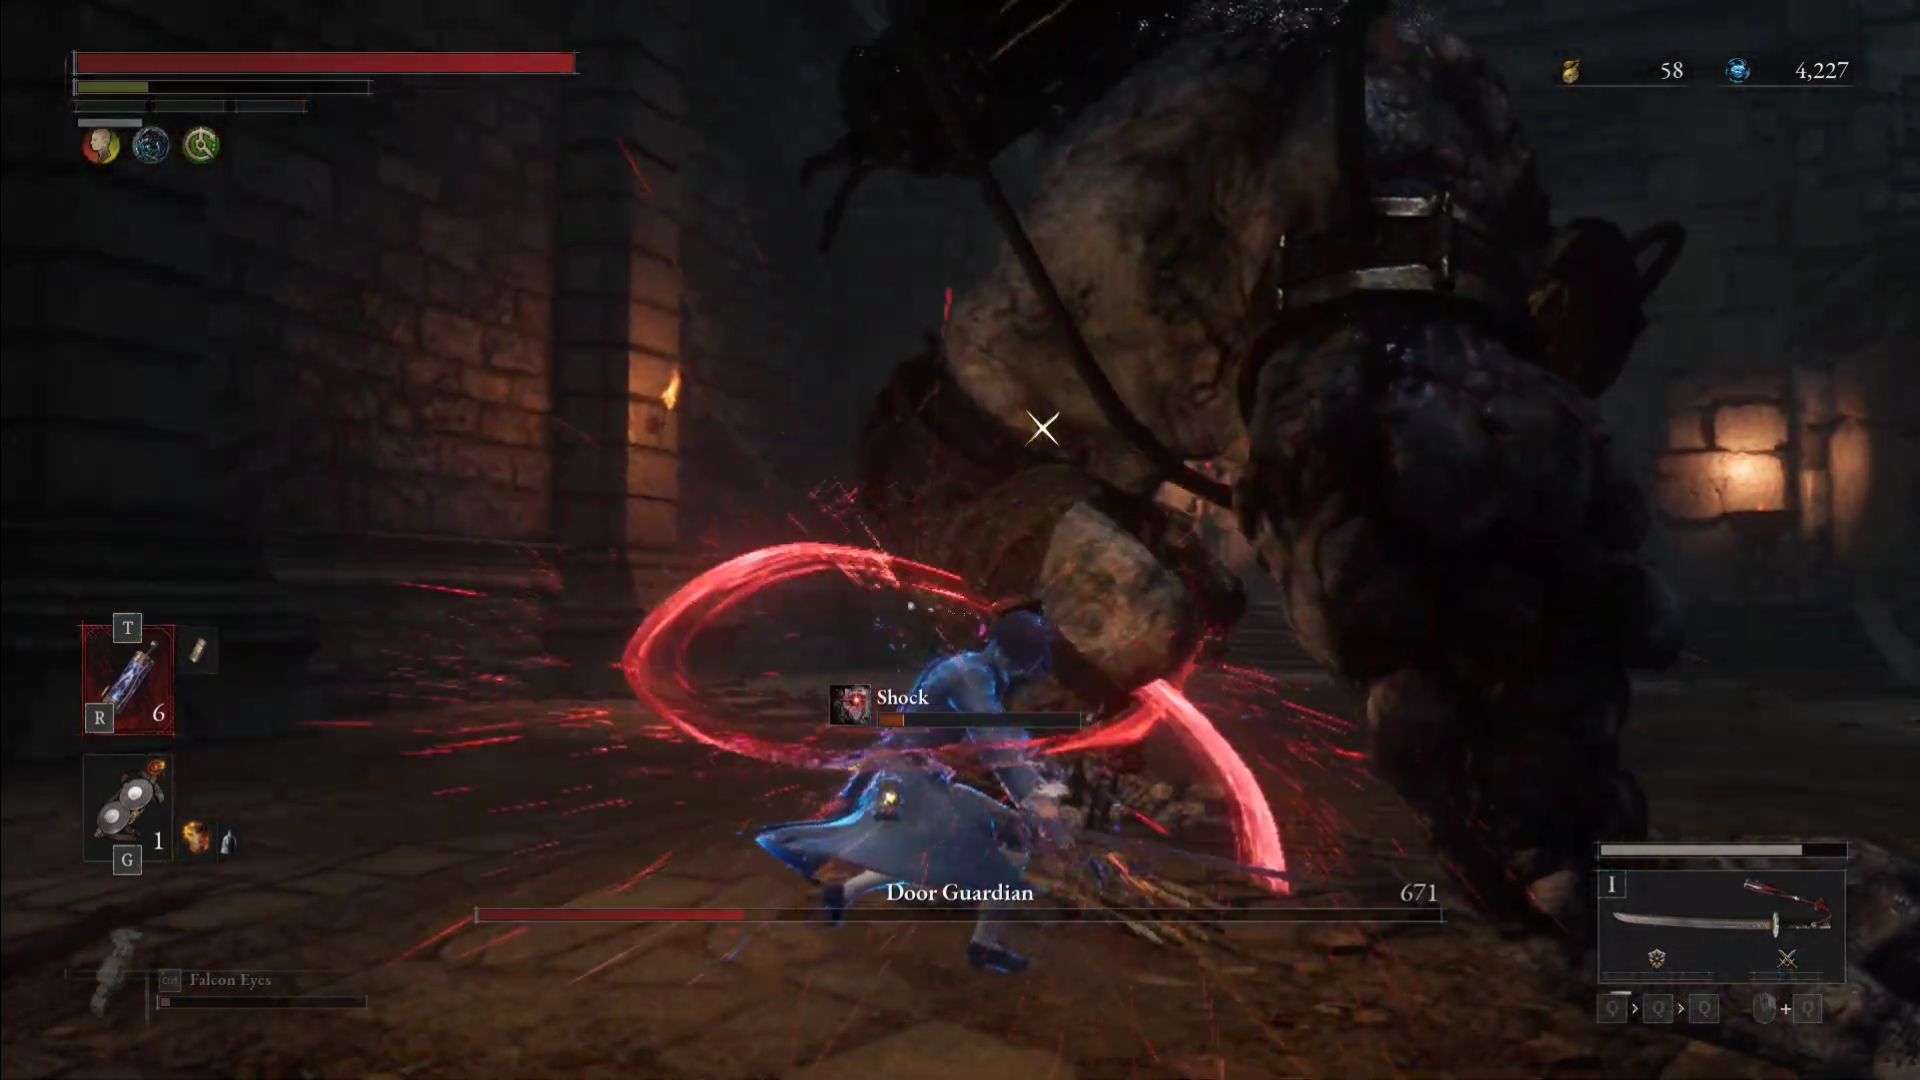 A screenshot of Youtuber "Xorv Playing Games" fighting the Door Guardian using the Two Dragons Sword weapon in Lies of P.